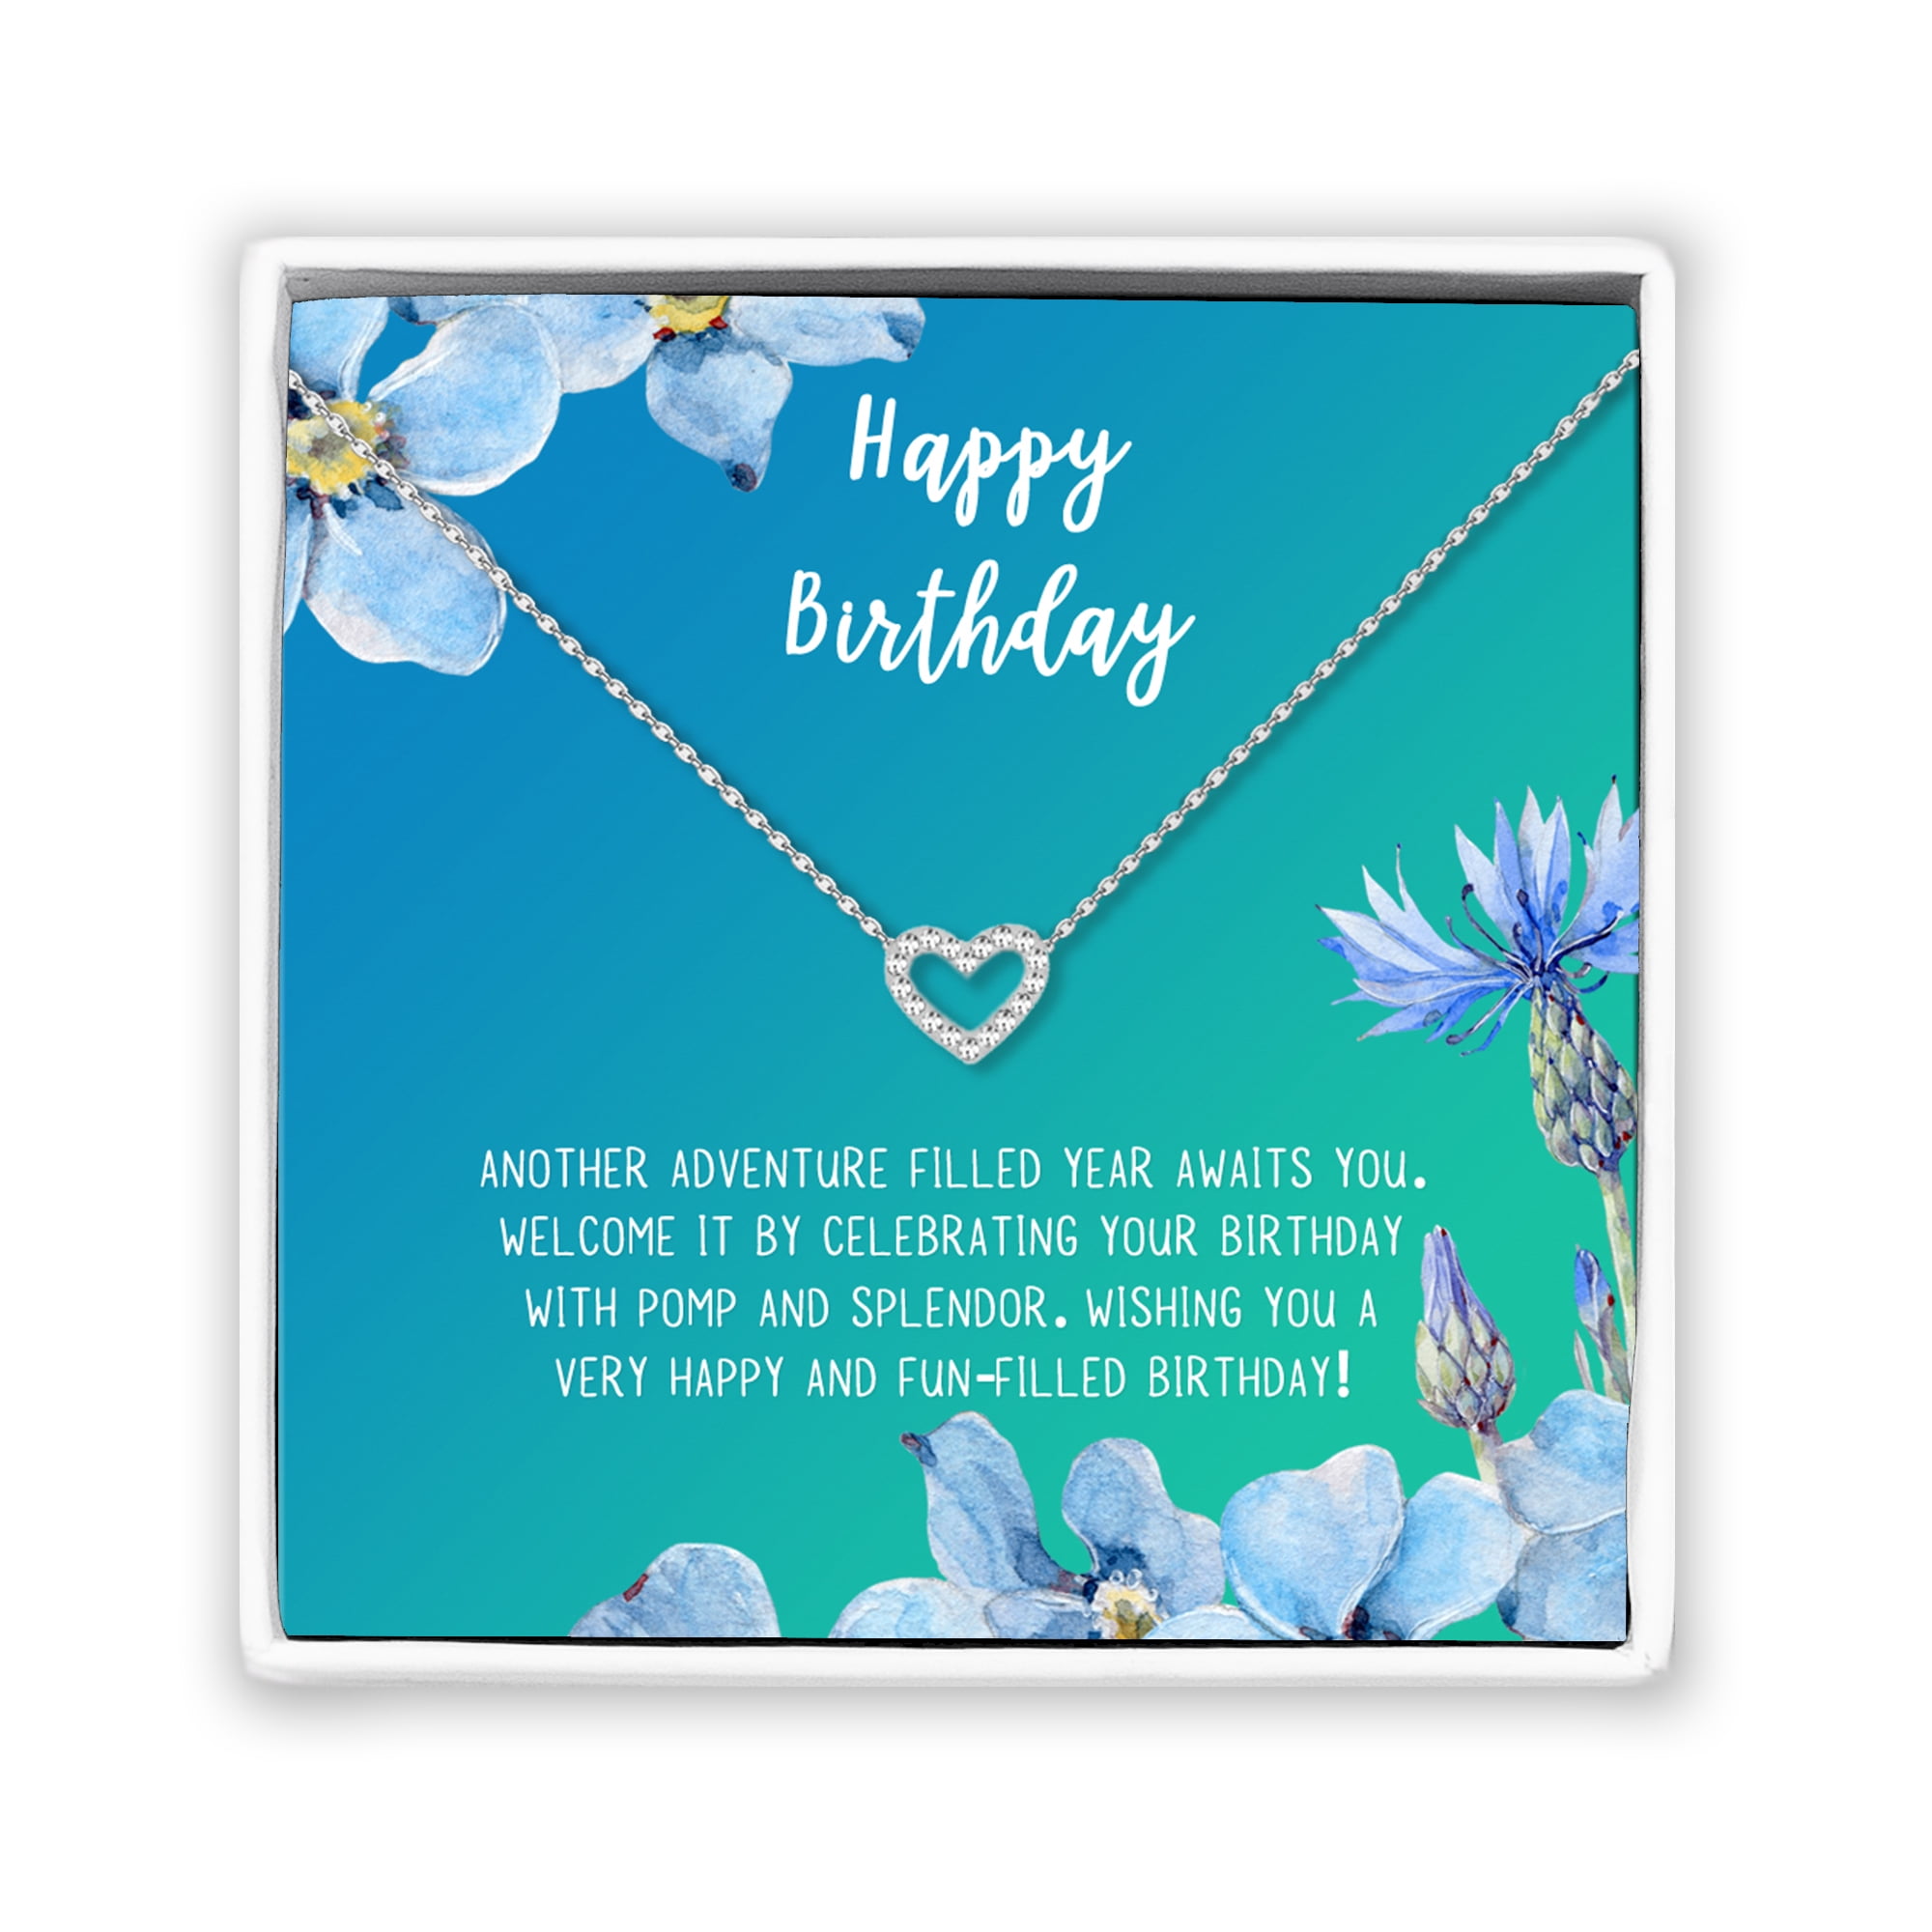 Details about   Custom card for couples girlfriend birthday gifts groom love show original title 